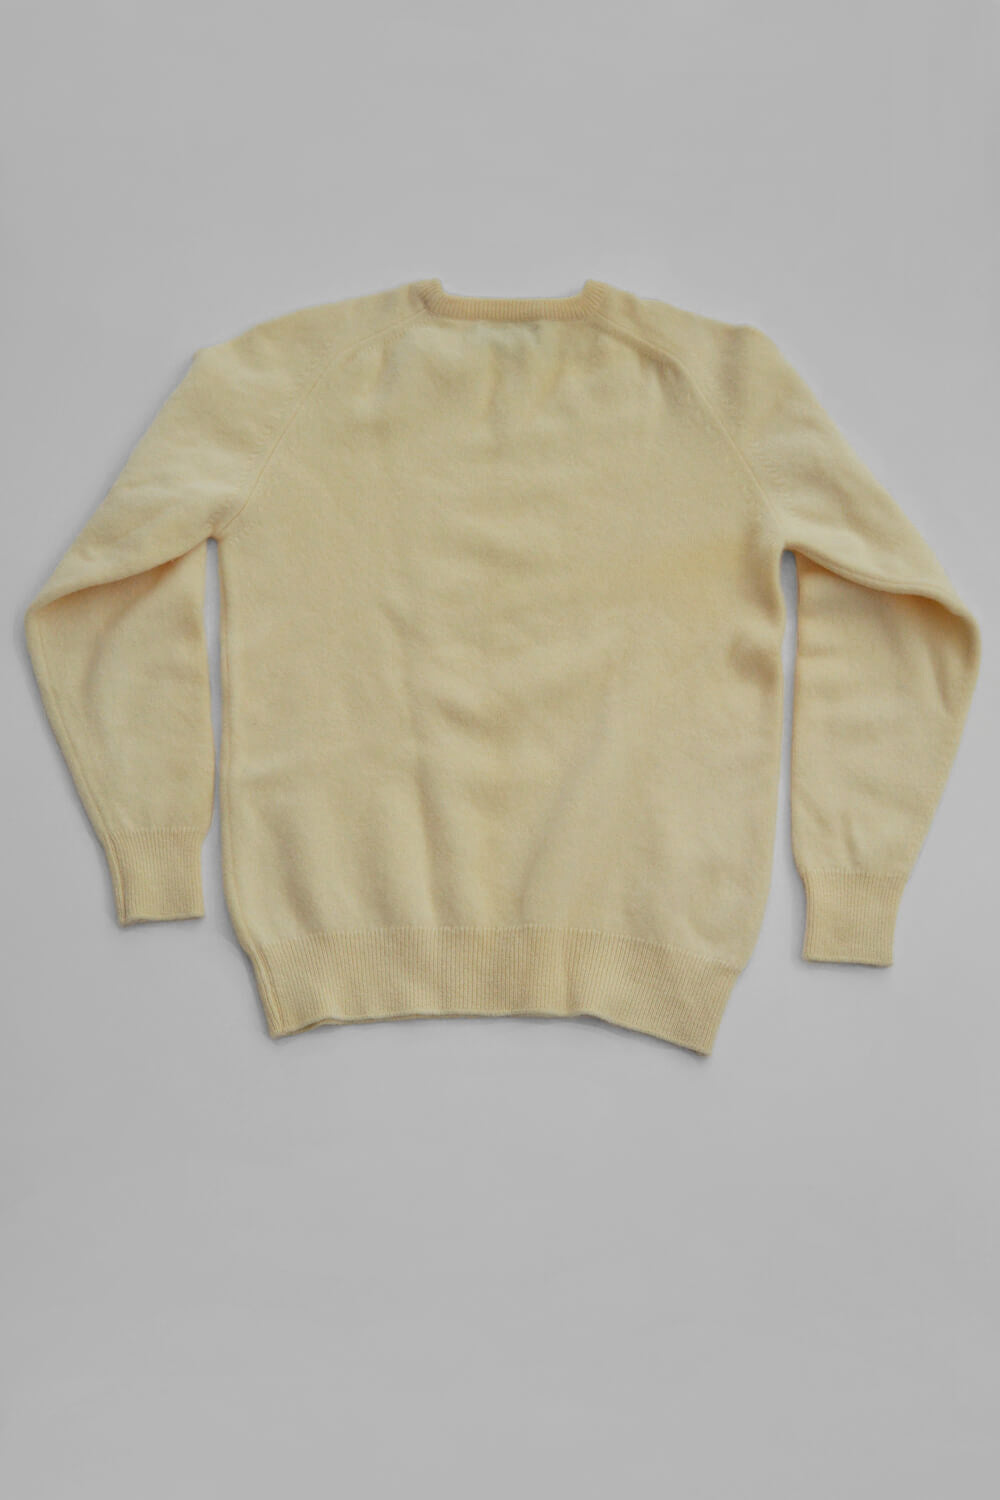 vintage classic crew neck sweater - pale yellow - size small